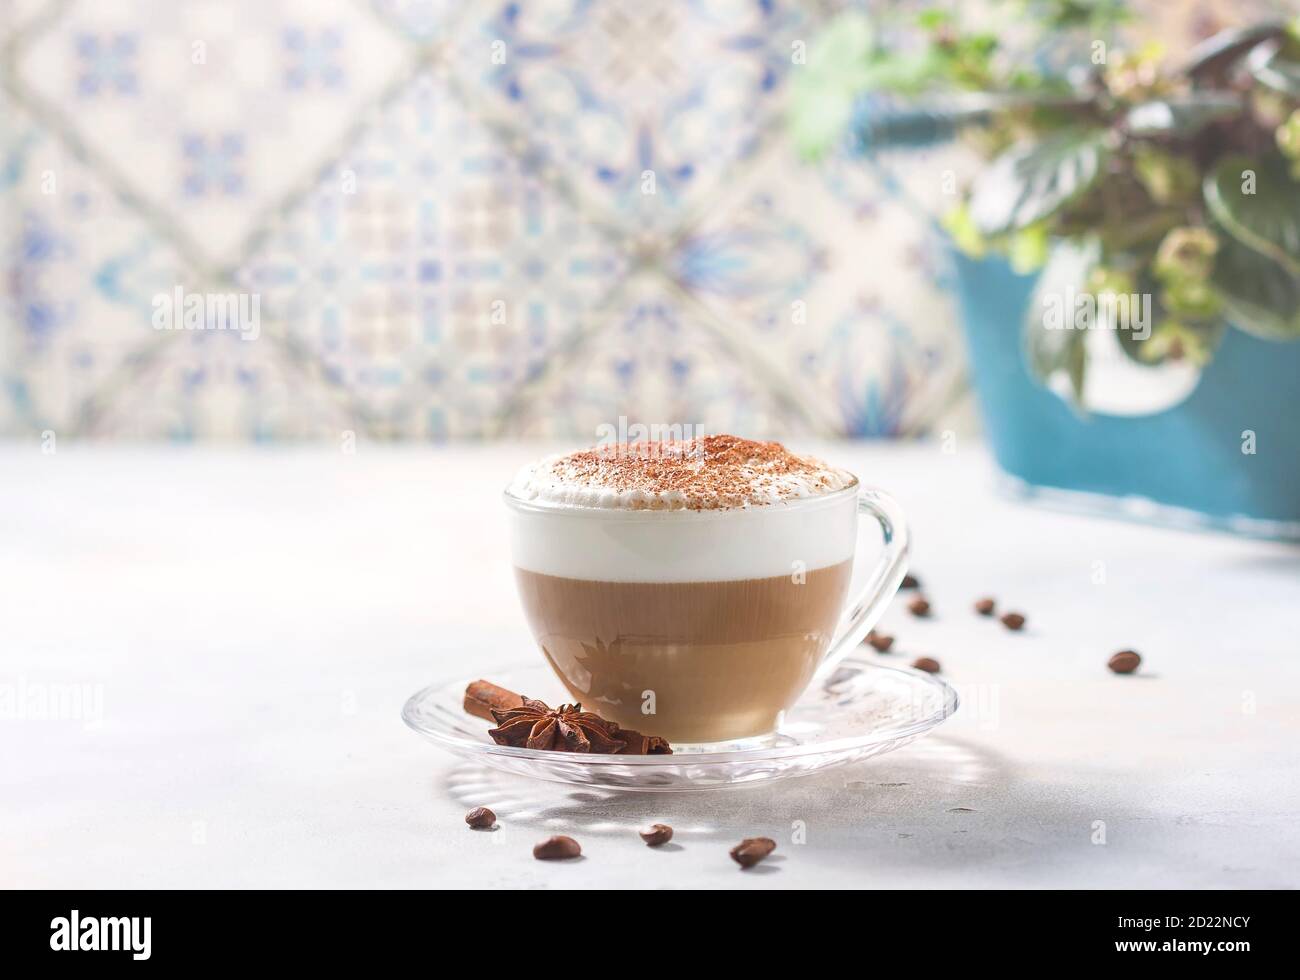 Cappuccino or latte in a glass cup on a light background. Stock Photo